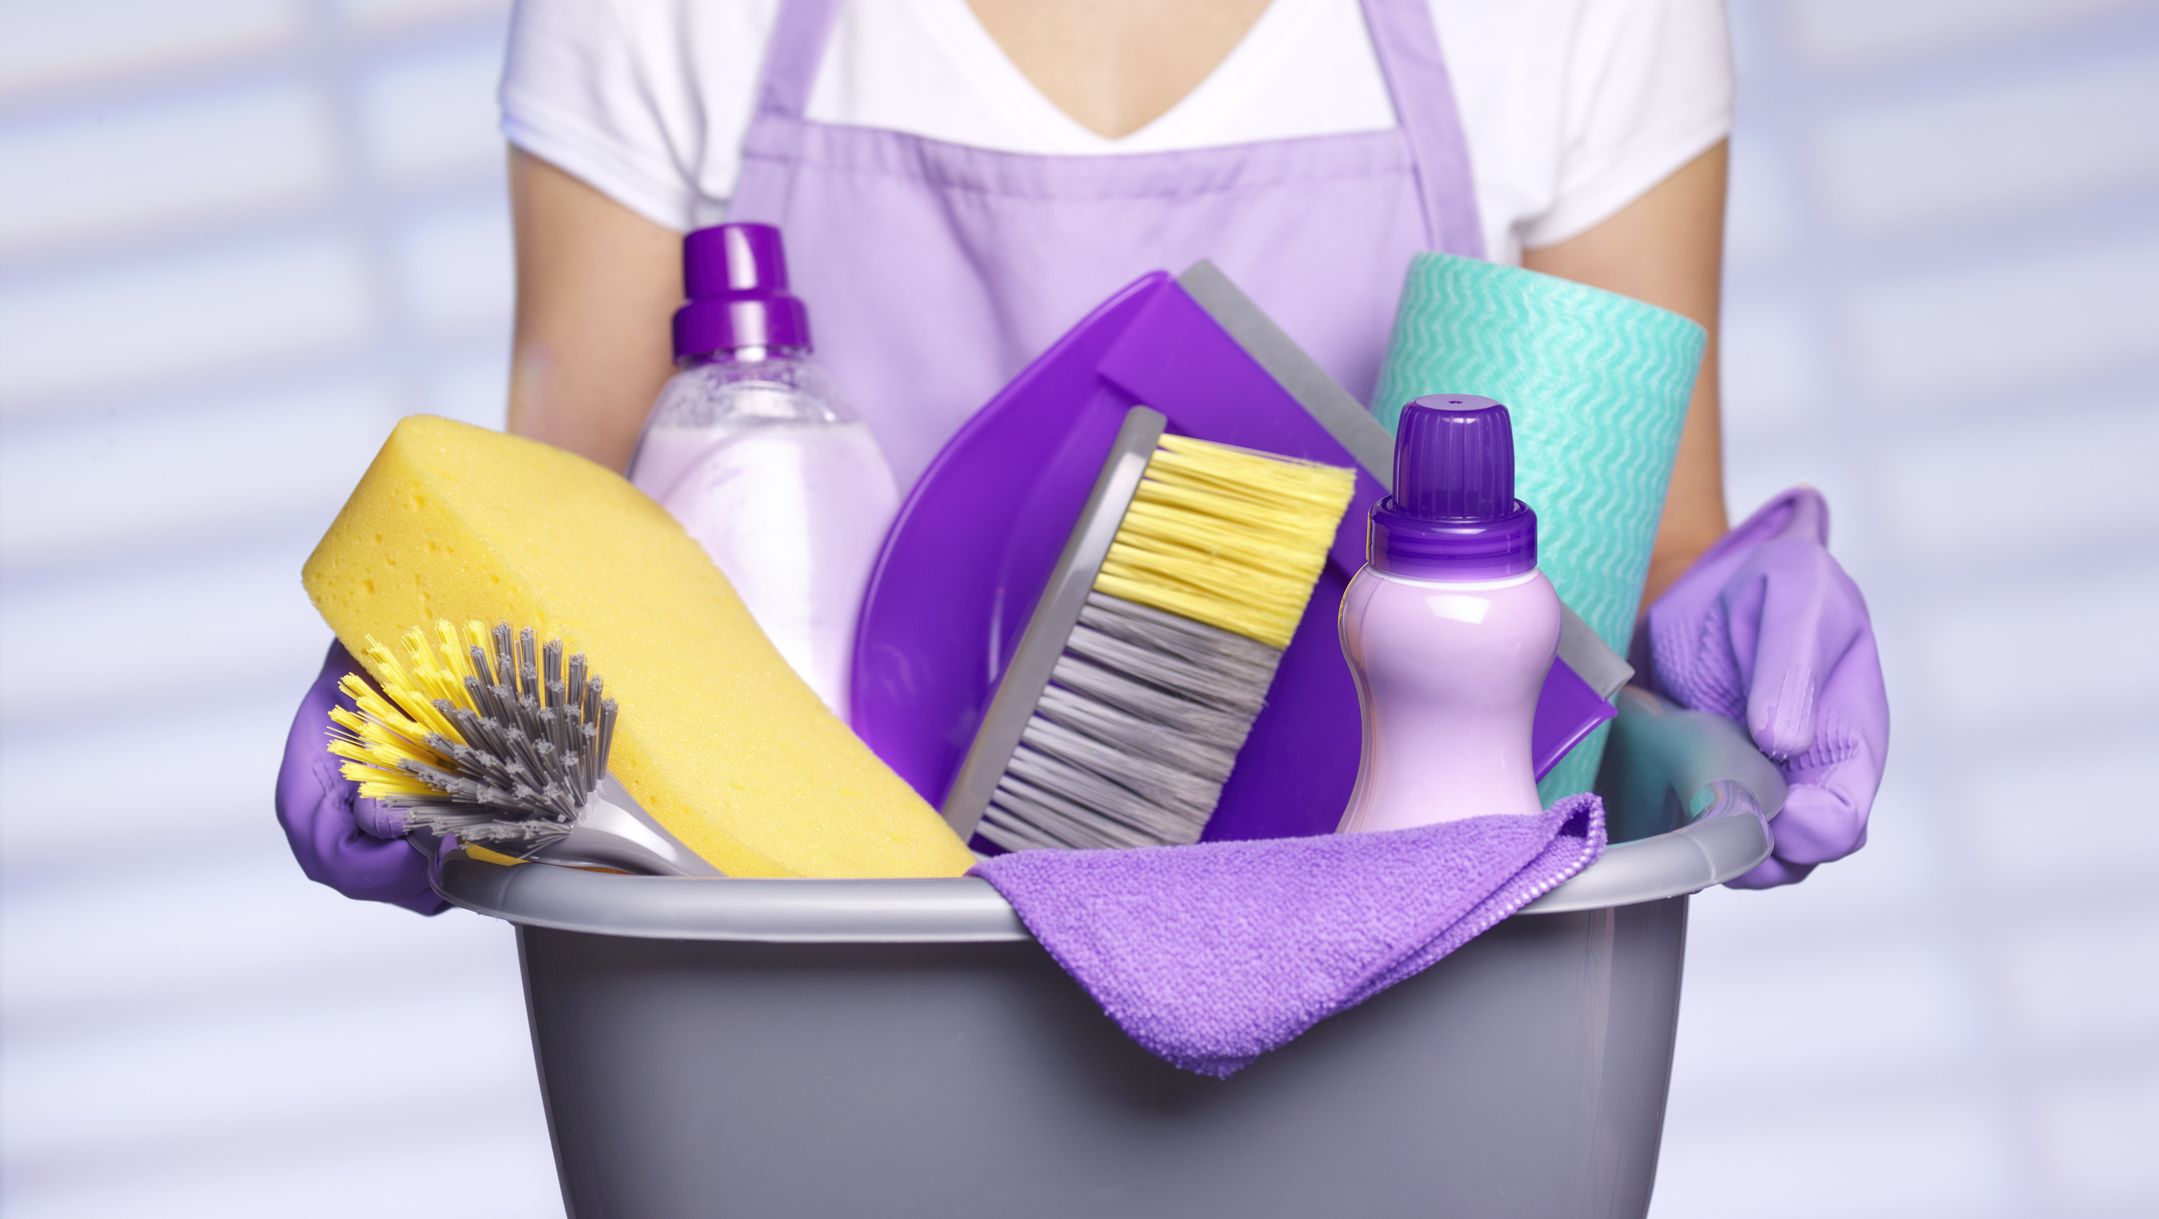 How to Deep Clean Your House — Tips for Cleaning House Quicker